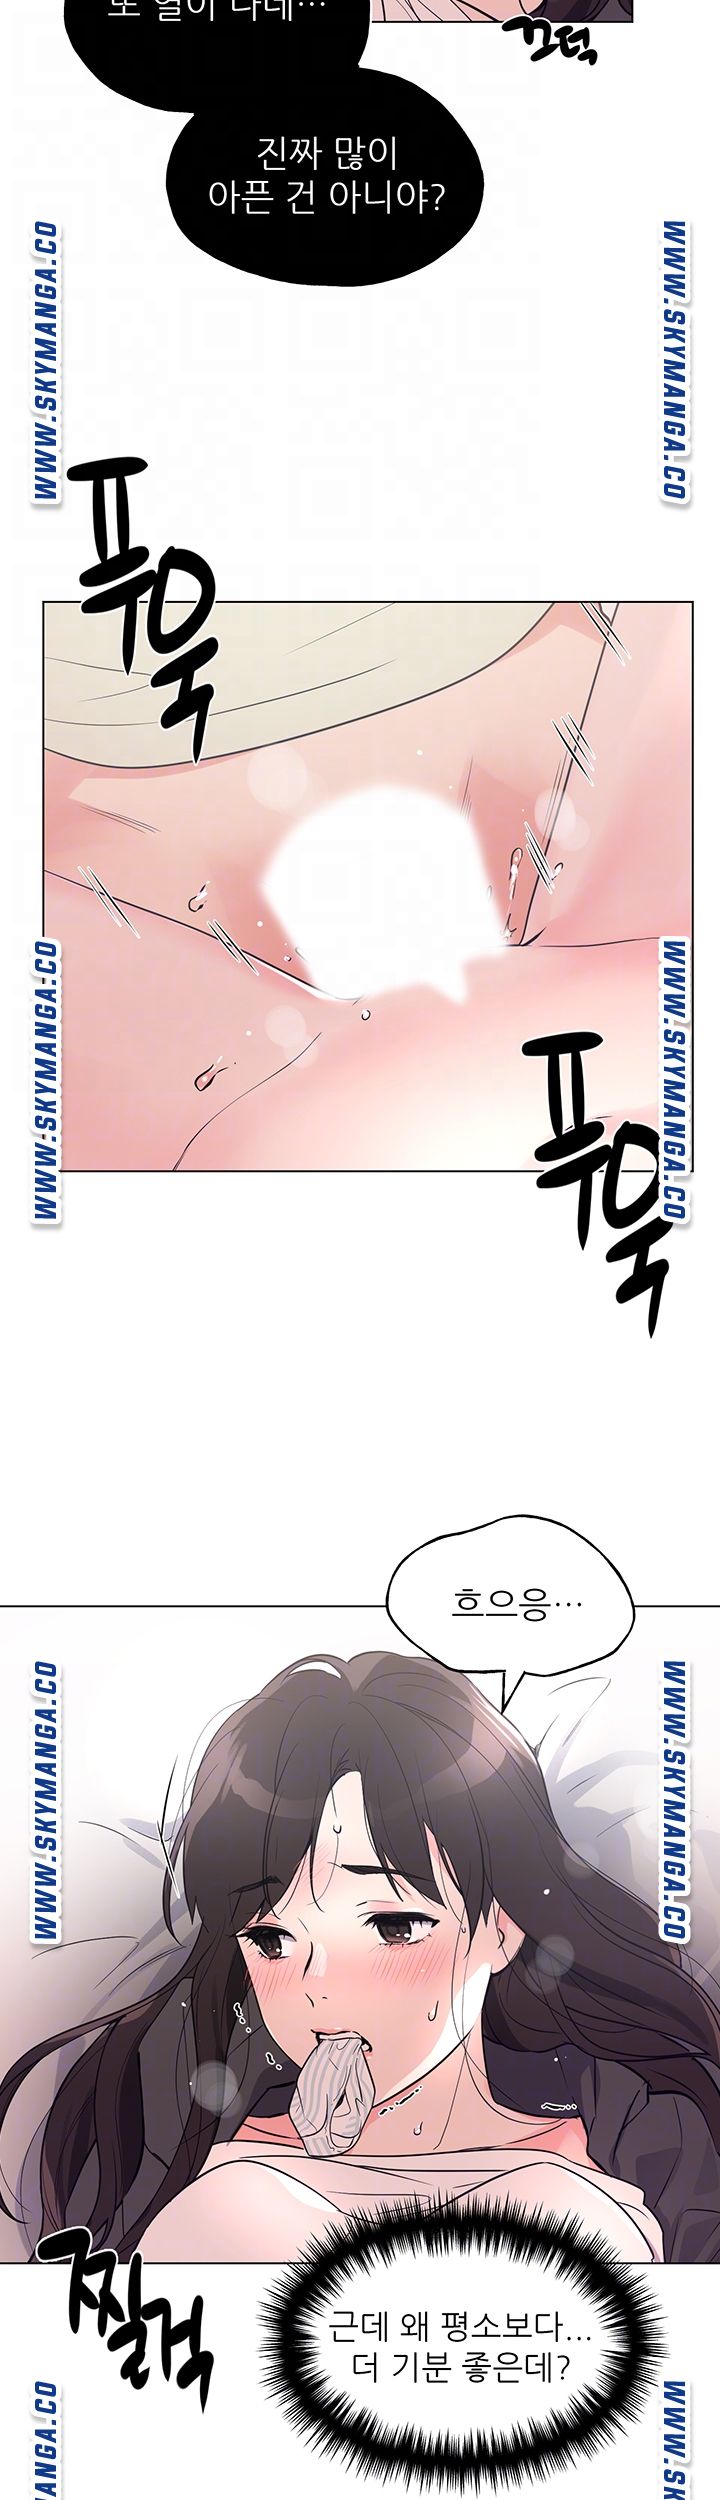 Repeater Raw - Chapter 86 Page 7